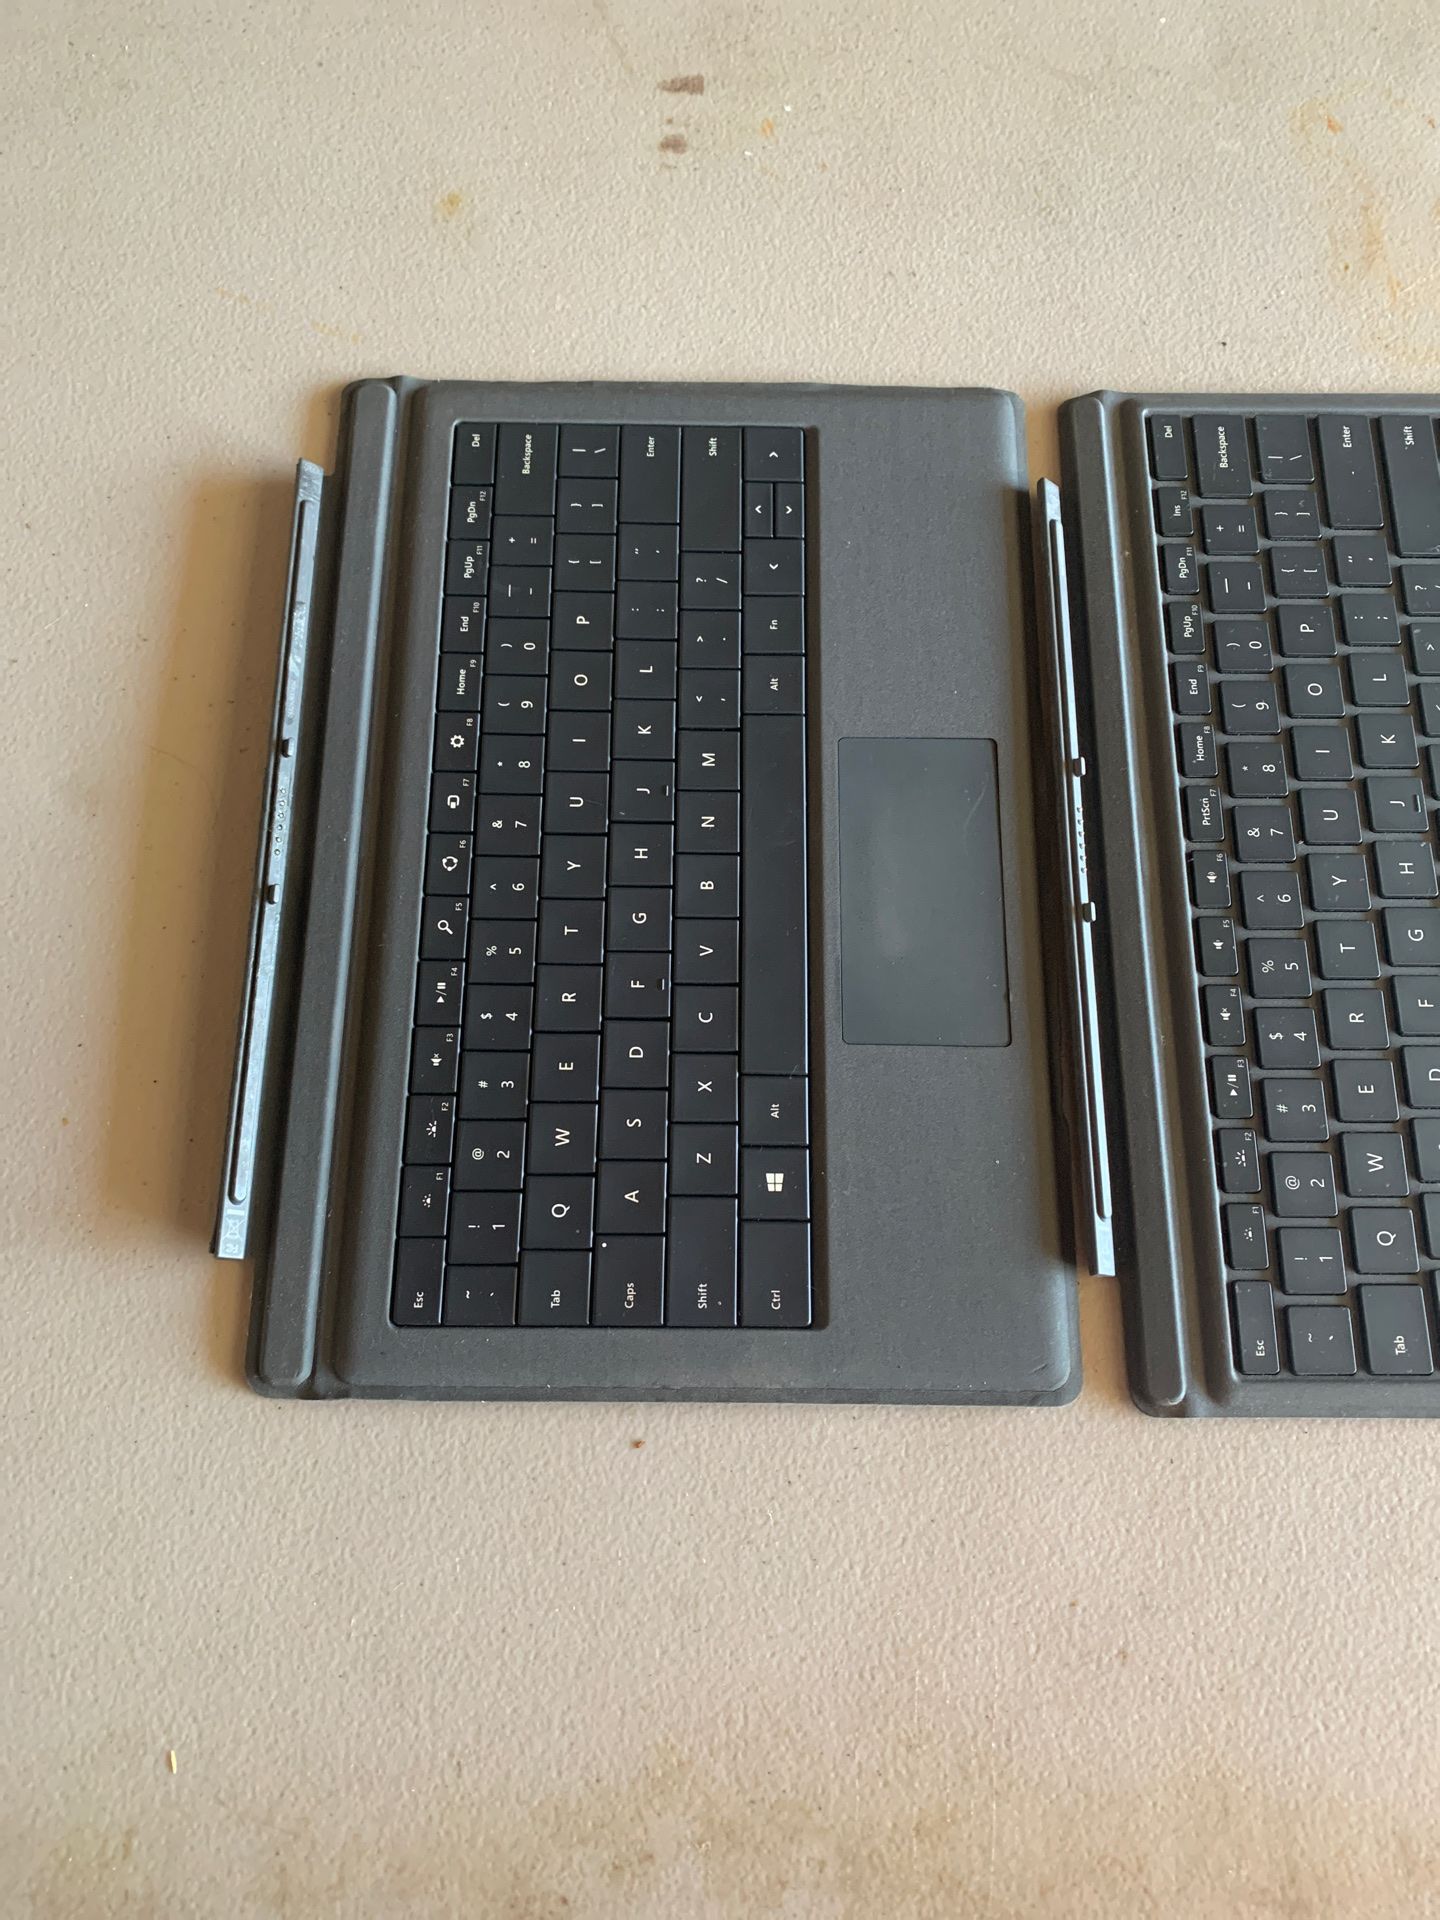 2 Microsoft surface keyboards cover,